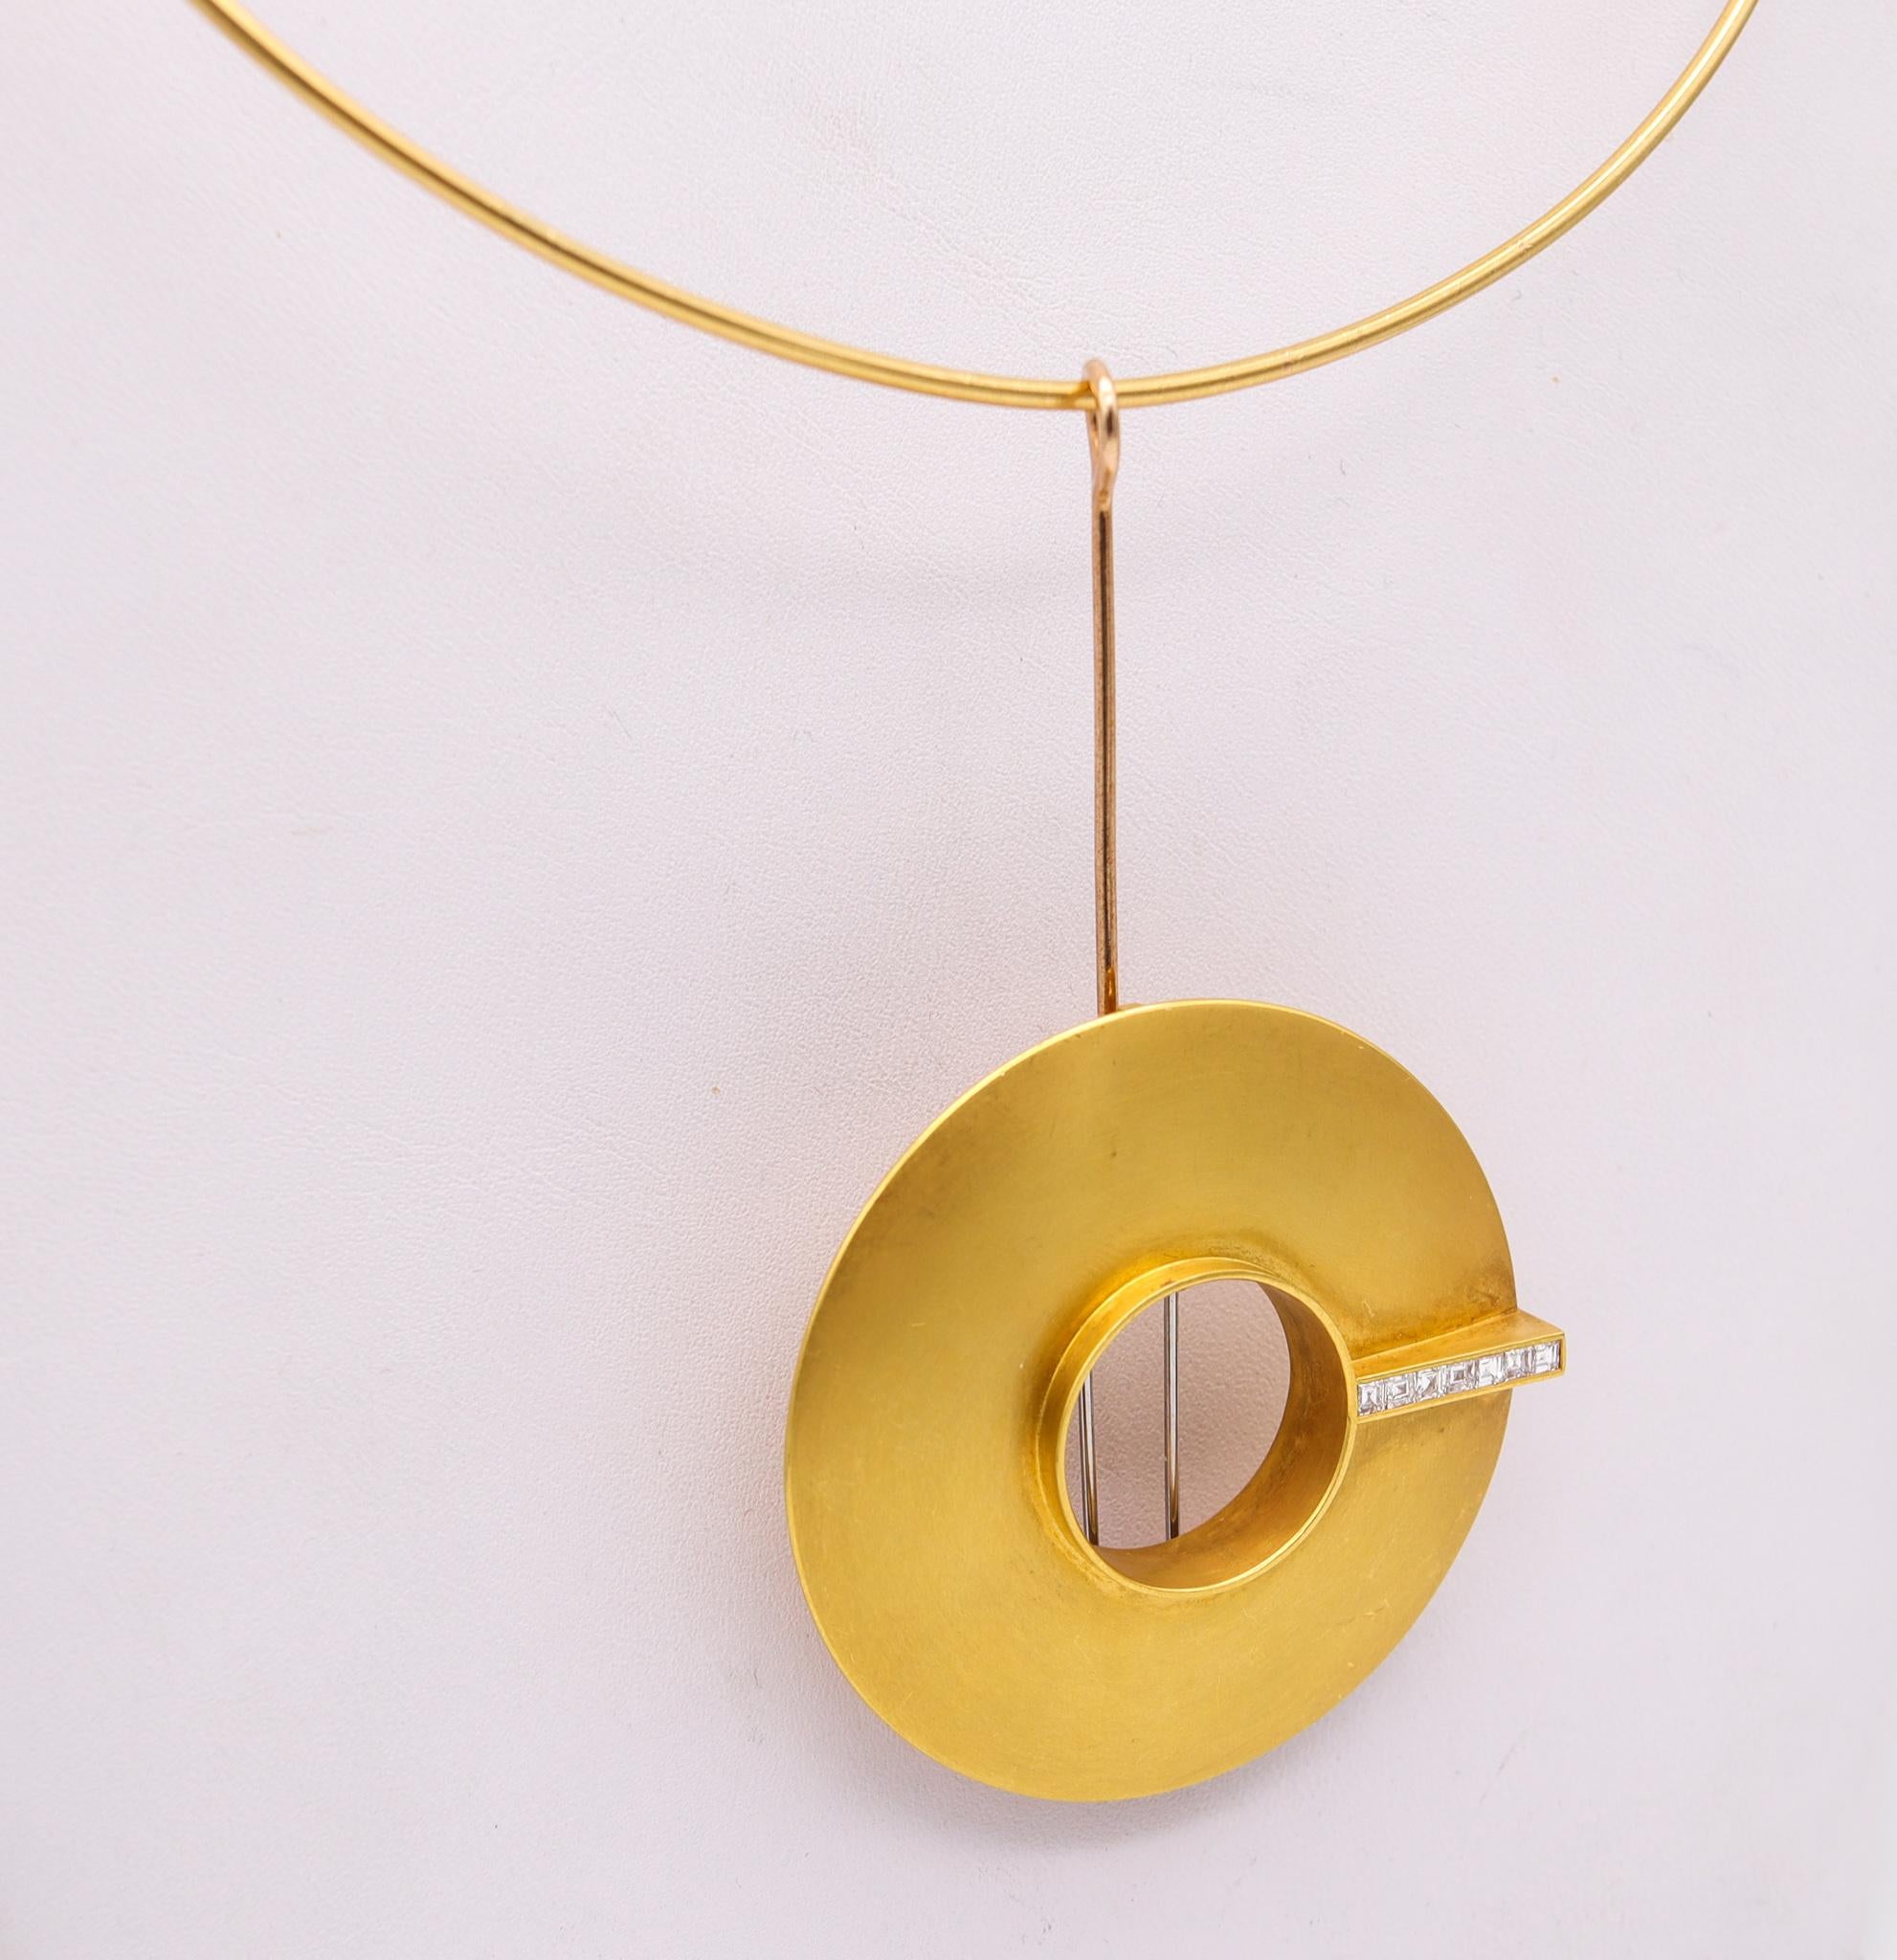 Modernism convertible necklace brooch.

A stunning geometric piece, created in Germany with the parameters of the Bauhaus school in solid yellow gold of 18 karats with frosted brushed finish. This convertible necklace brooch is fitted at the reverse